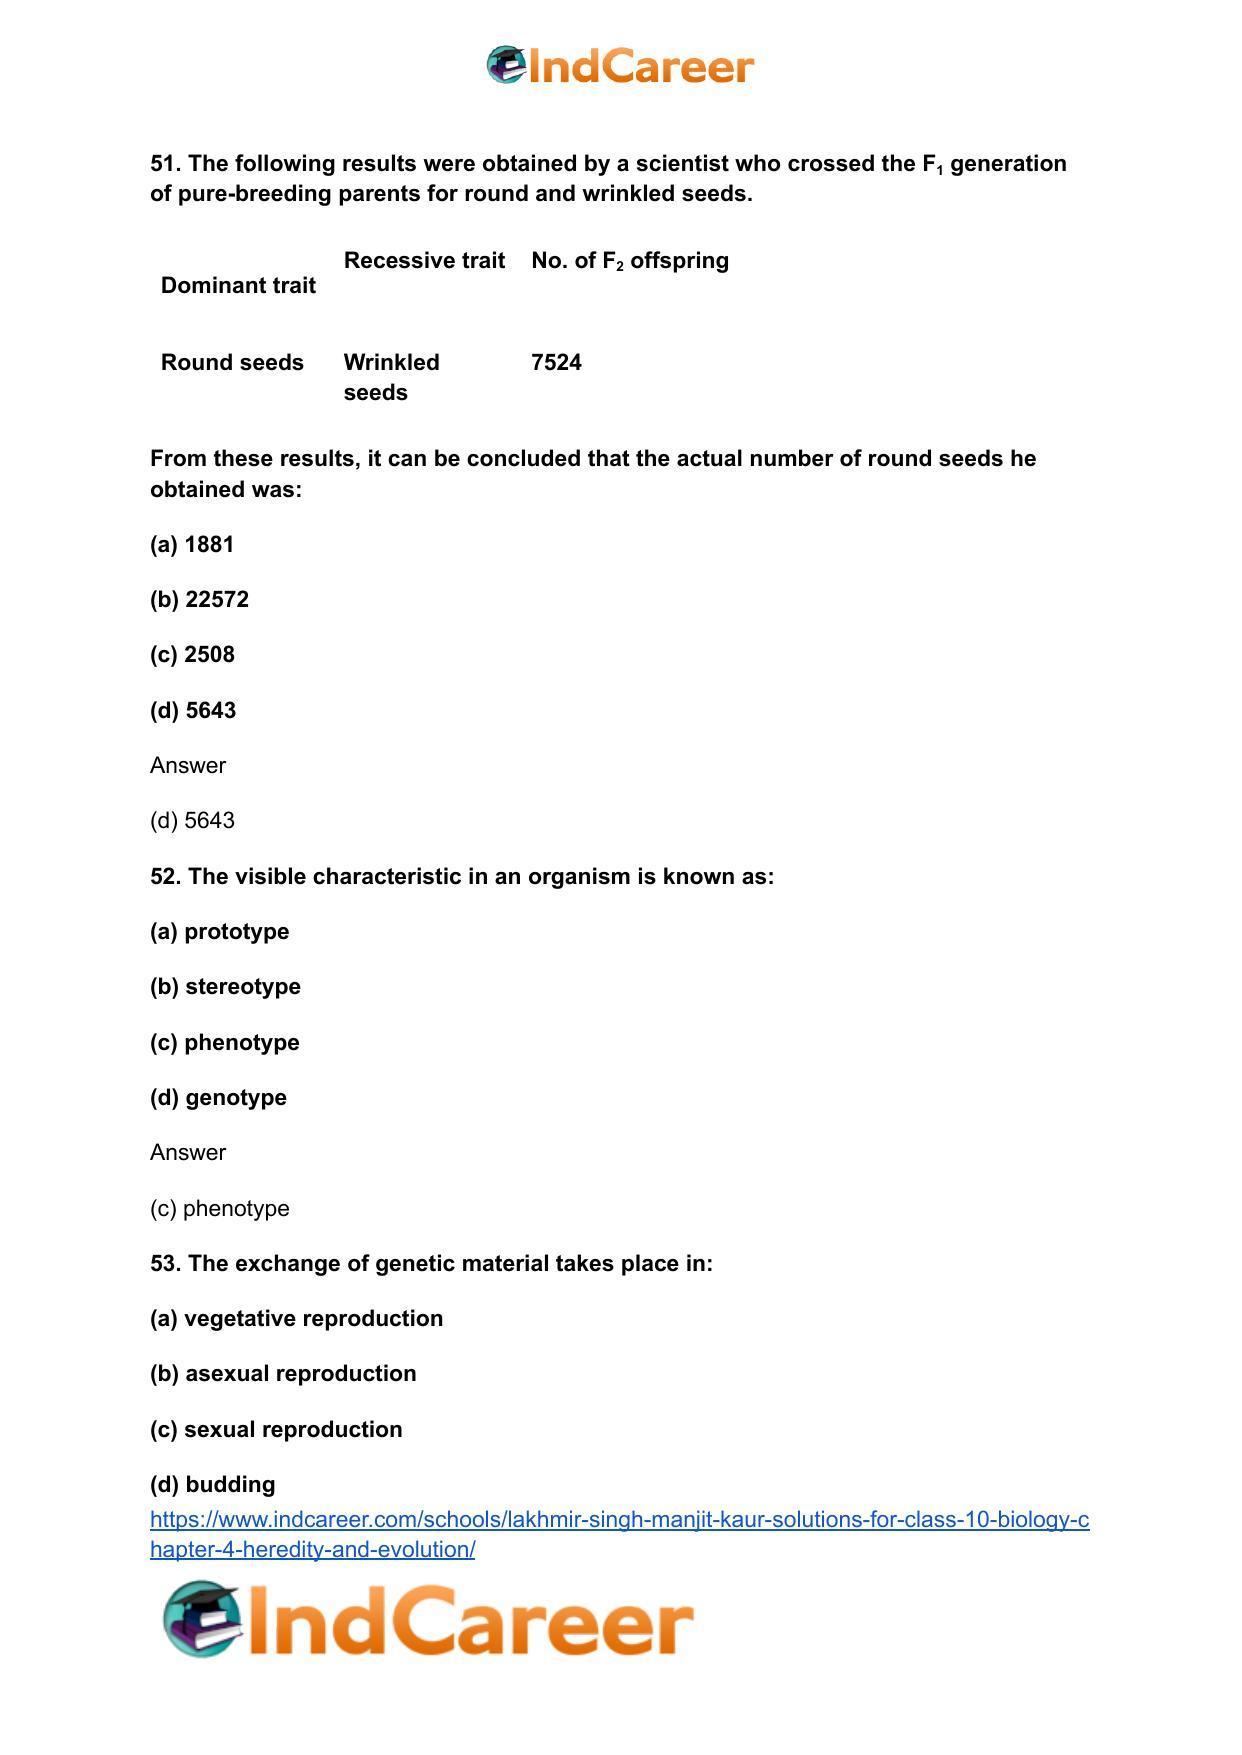 Lakhmir Singh Manjit Kaur  Solutions for Class 10 Biology: Chapter 4- Heredity and Evolution - Page 16